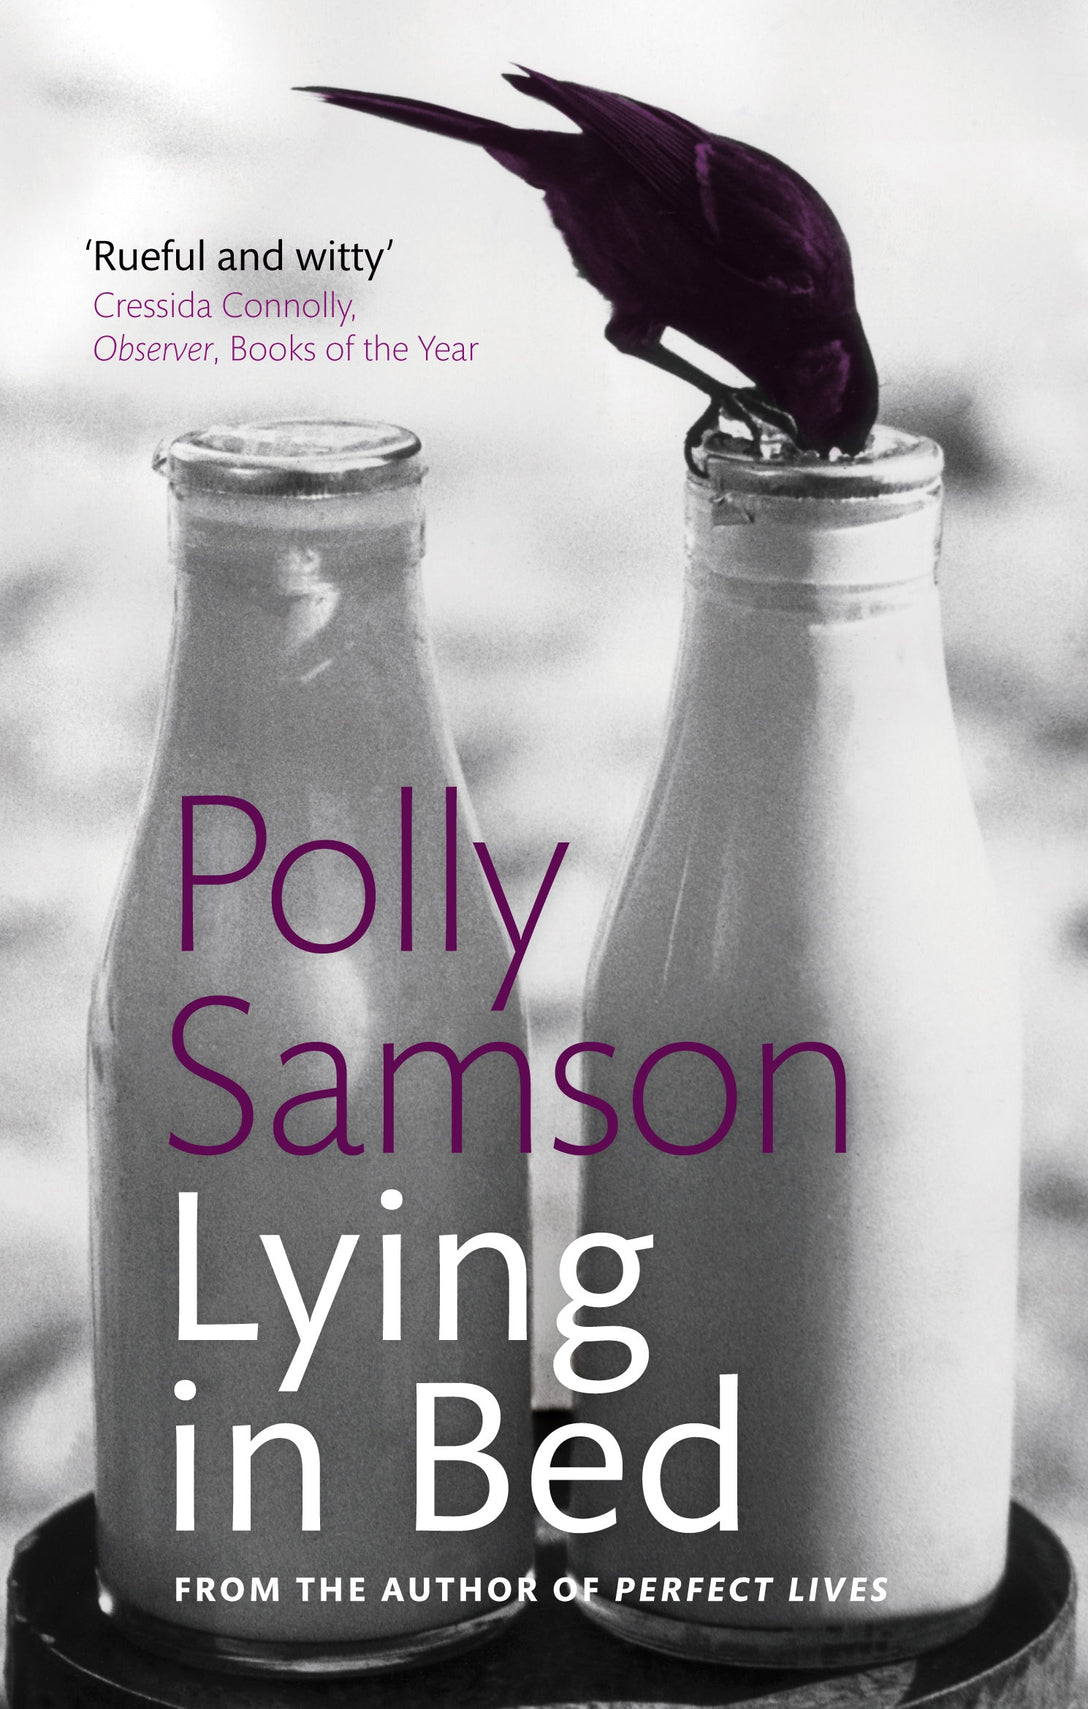 Lying In Bed by Polly Samson